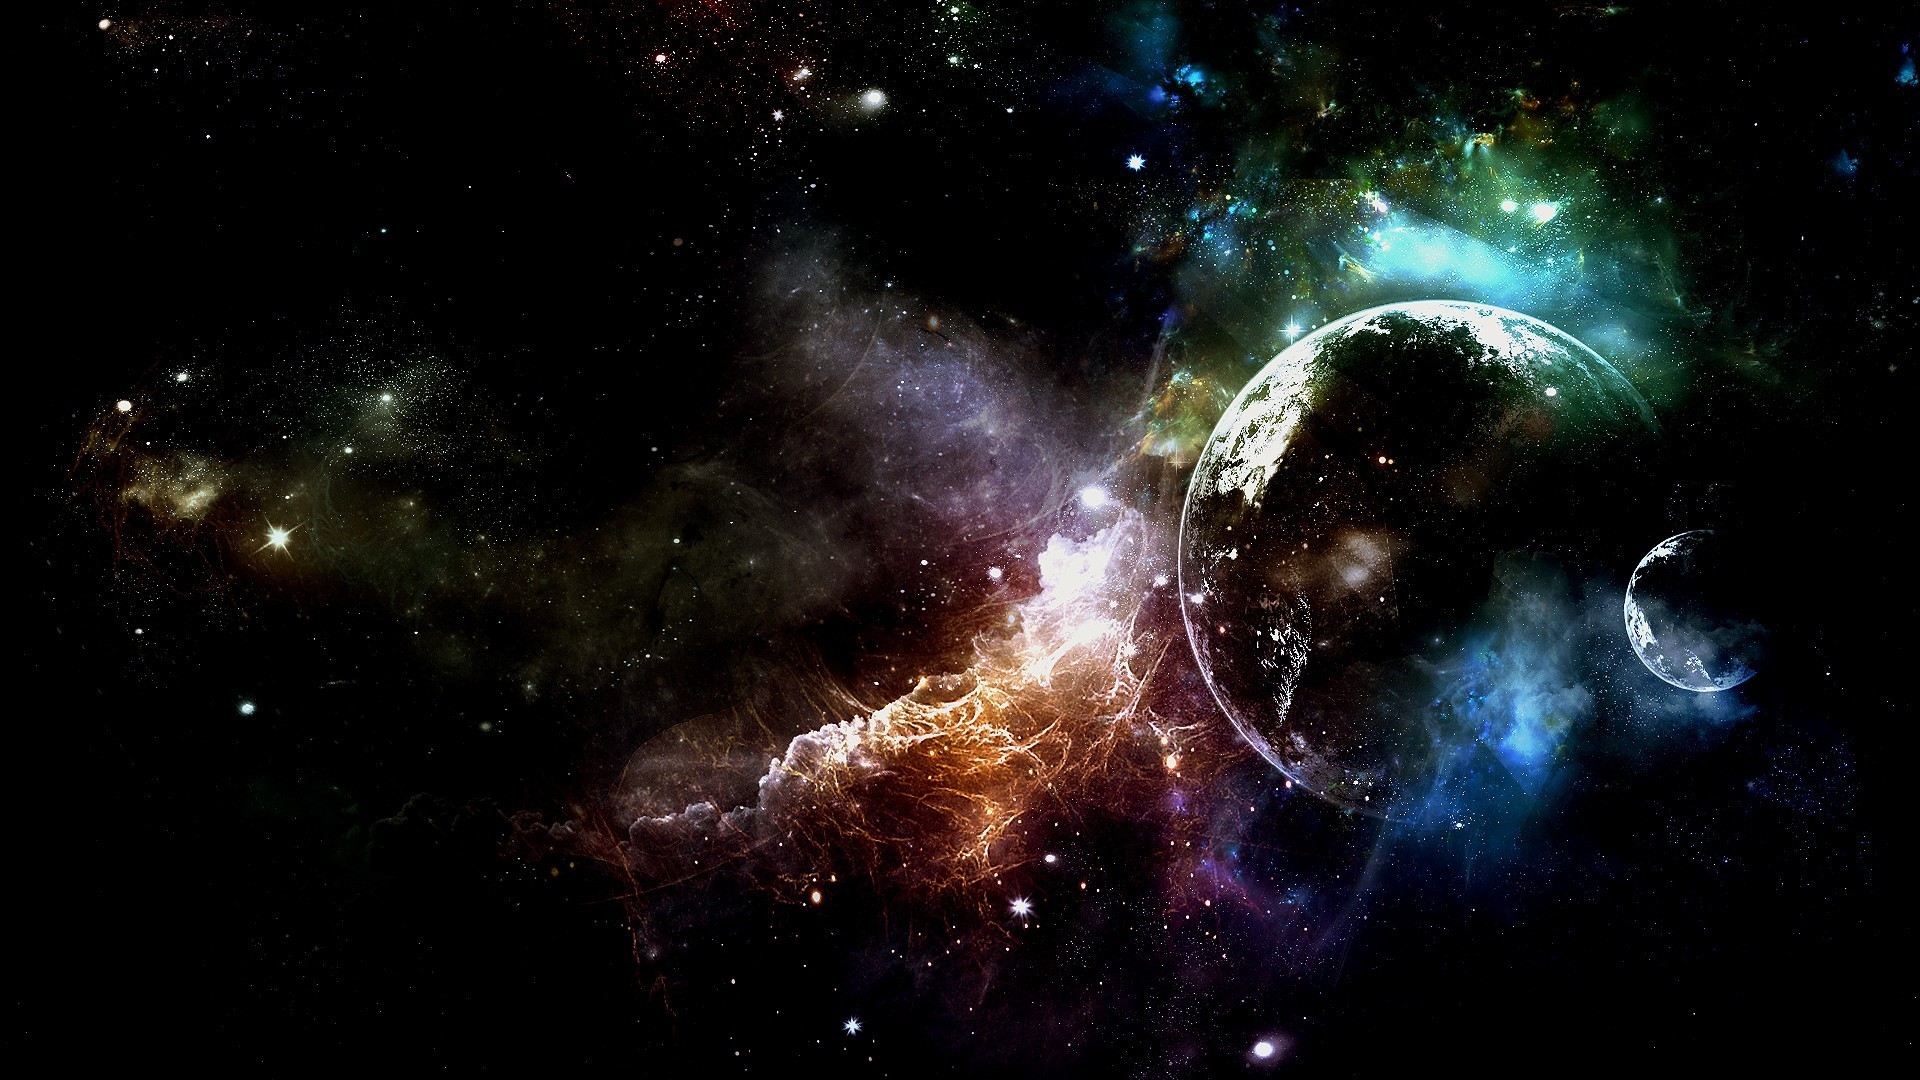 Wallpaper HD Space Image For